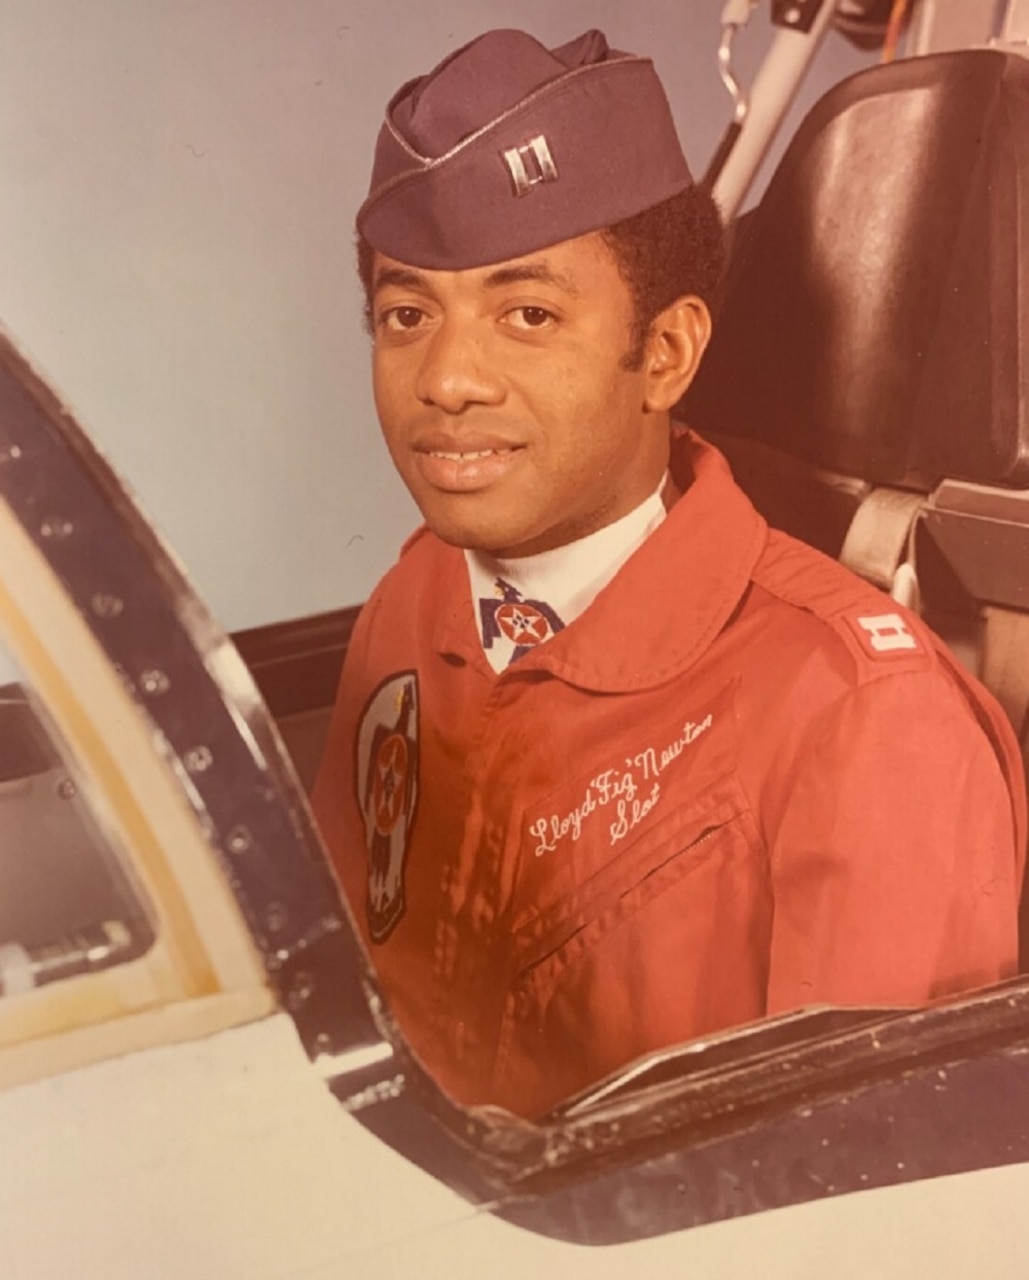 A man in a military uniform poses for a photo in the cockpit of an airplane.